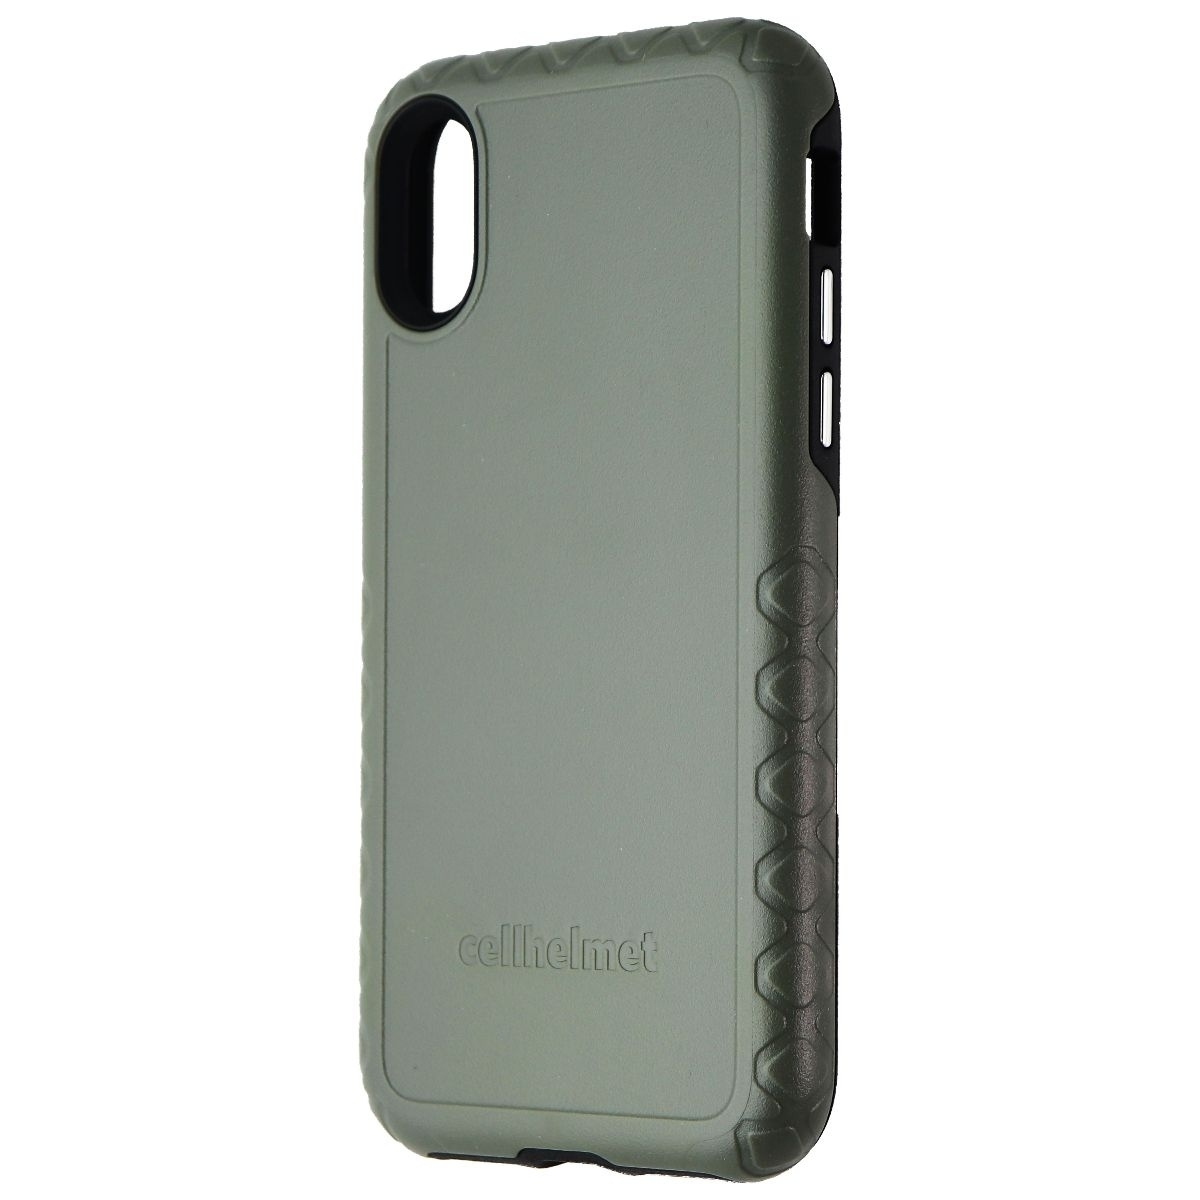 CellHelmet Fortitude Pro Series Hard Case For IPhone Xs And X - Olive Dark Drab